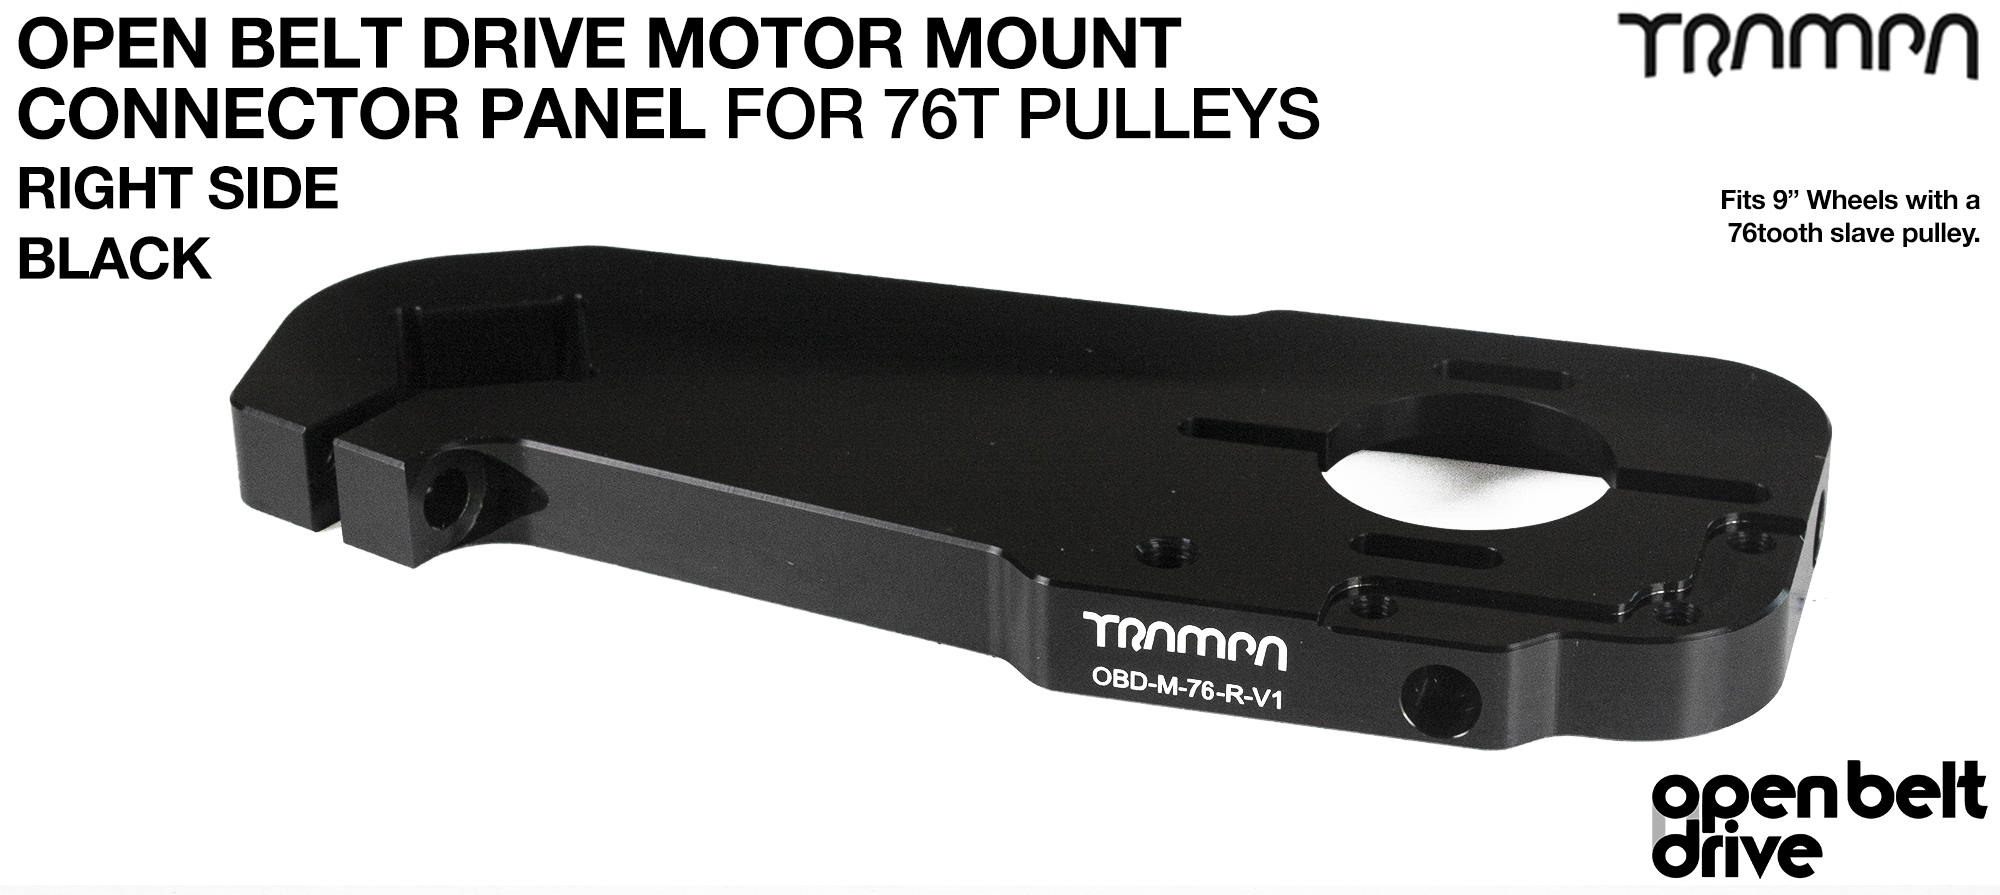 OBD Motor Mount Connector Panel for 76 tooth Pulleys - GOOFY - BLACK